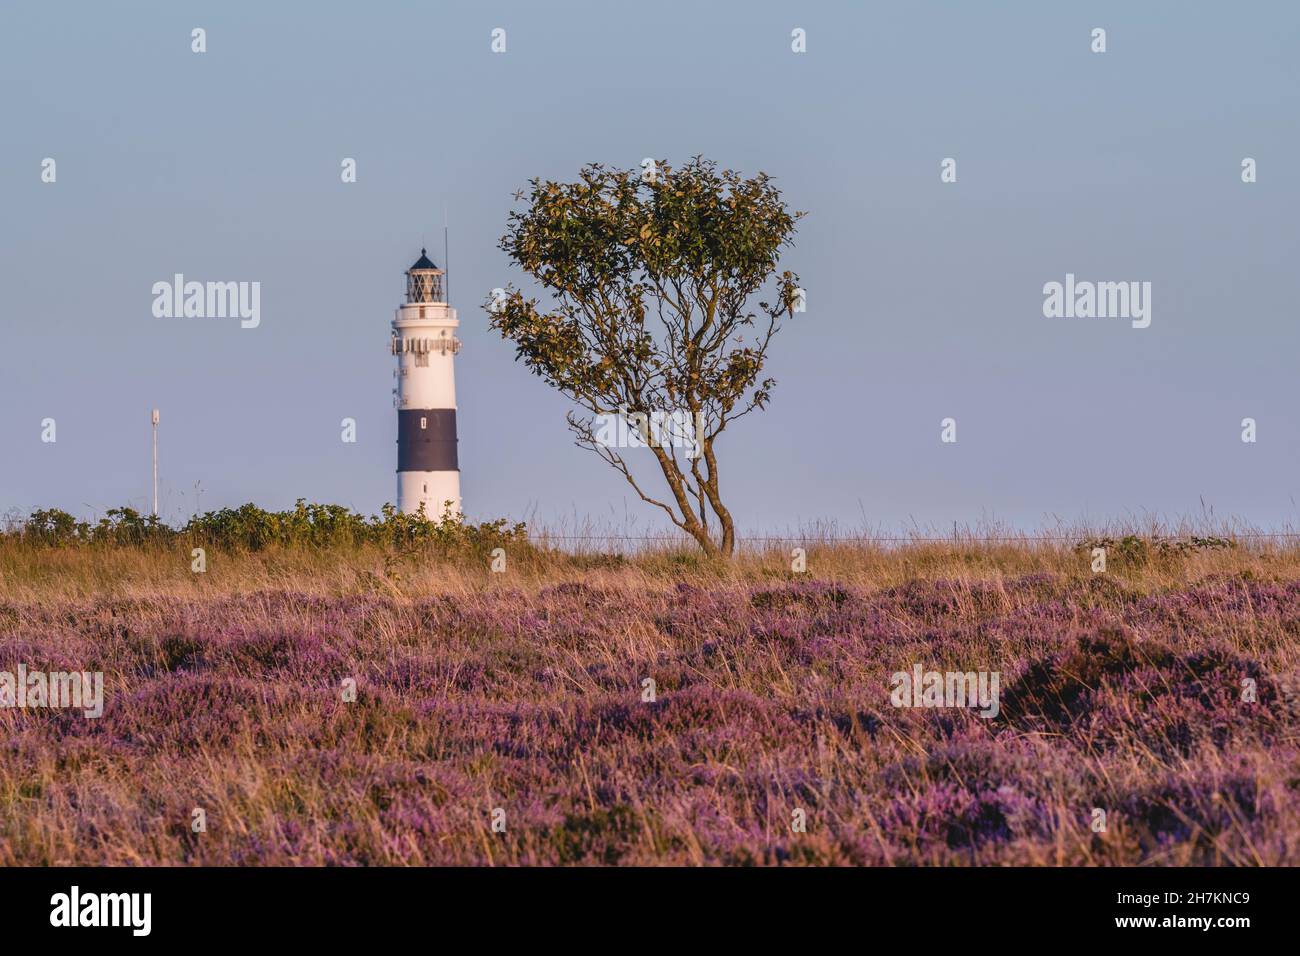 Single tree in Braderuper Heide nature reserve with Kampen Lighthouse in background Stock Photo